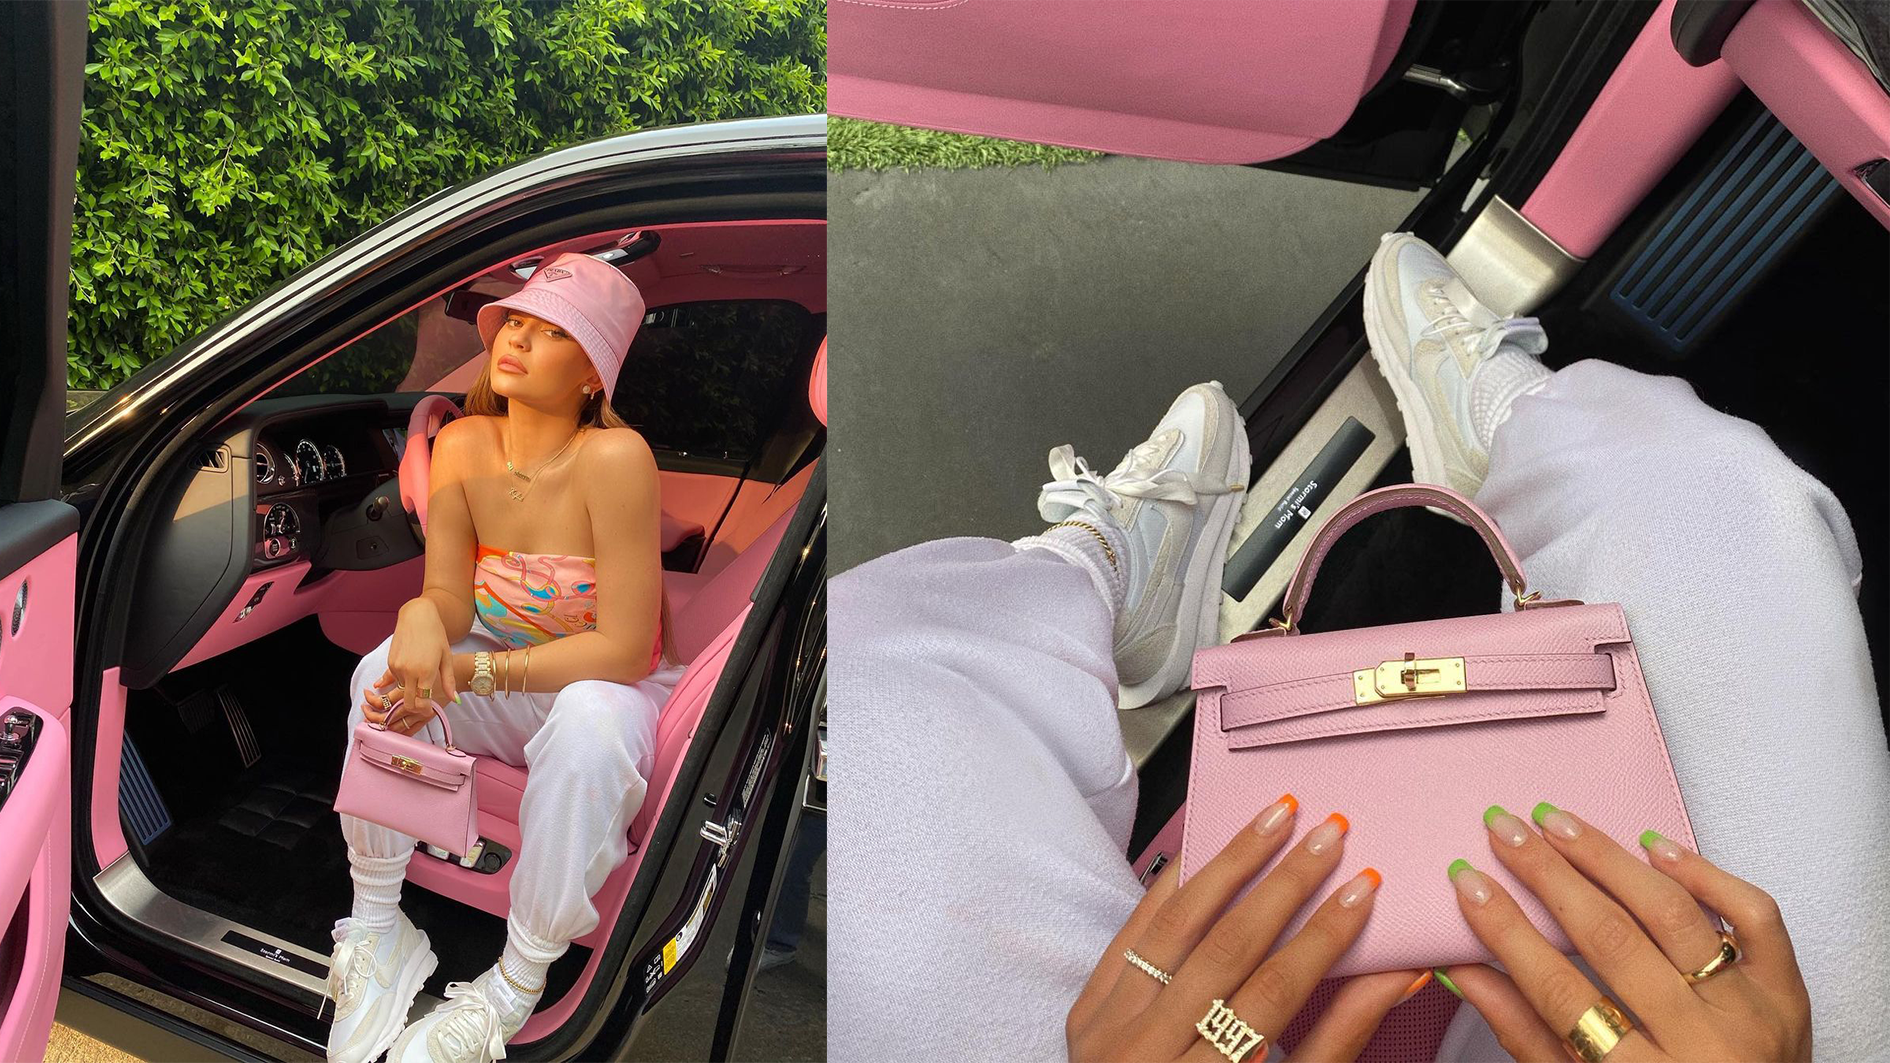 Kylie Jenner poses with $8,000 Hermes bag and $500 Prada hat after